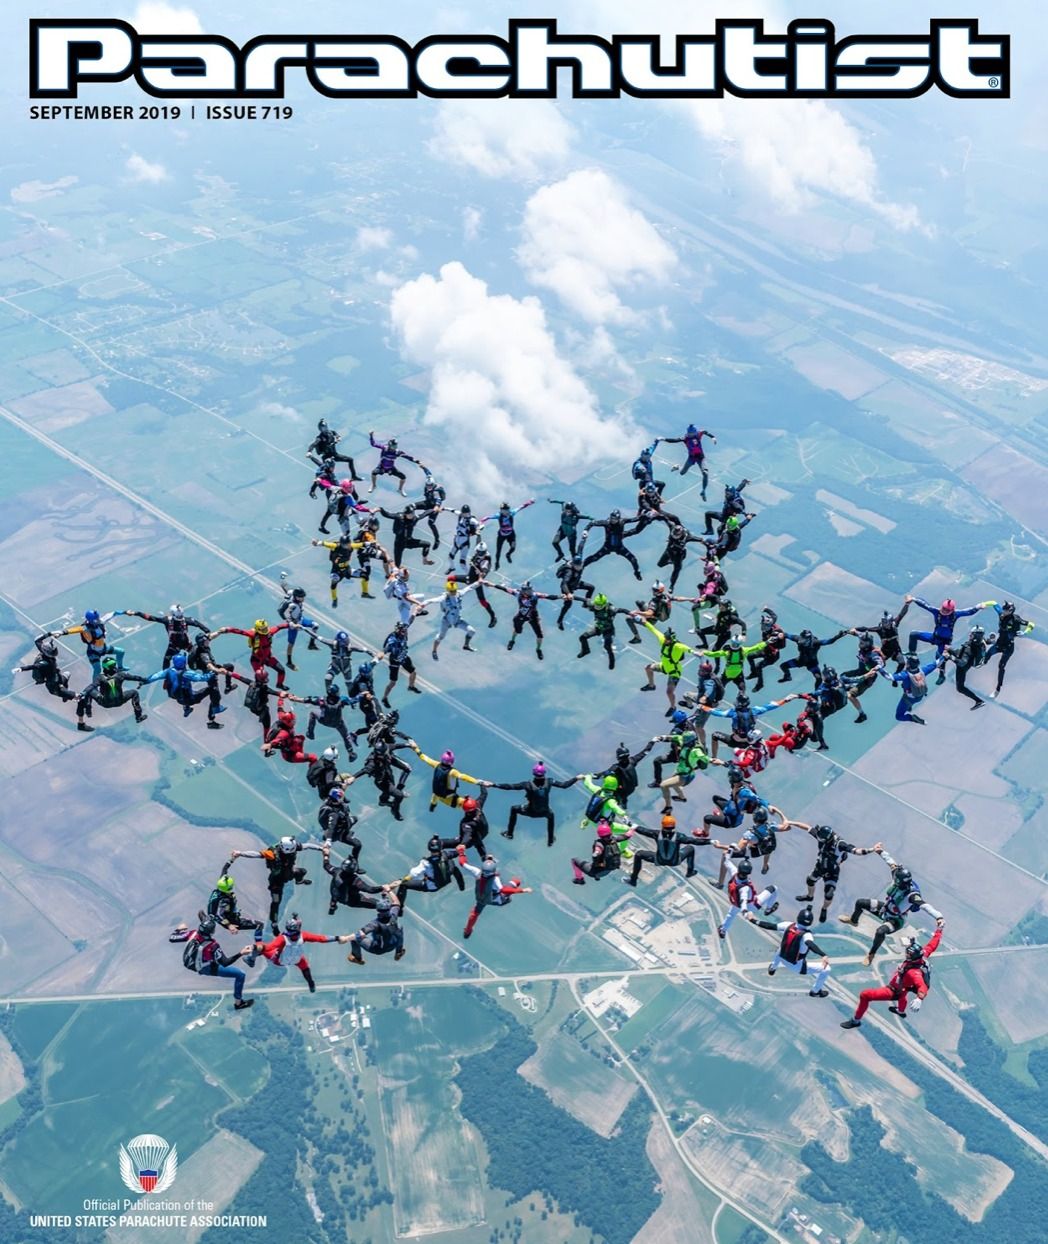 Stand Together 3 plane formation Tryout Camp at Skydive chicago